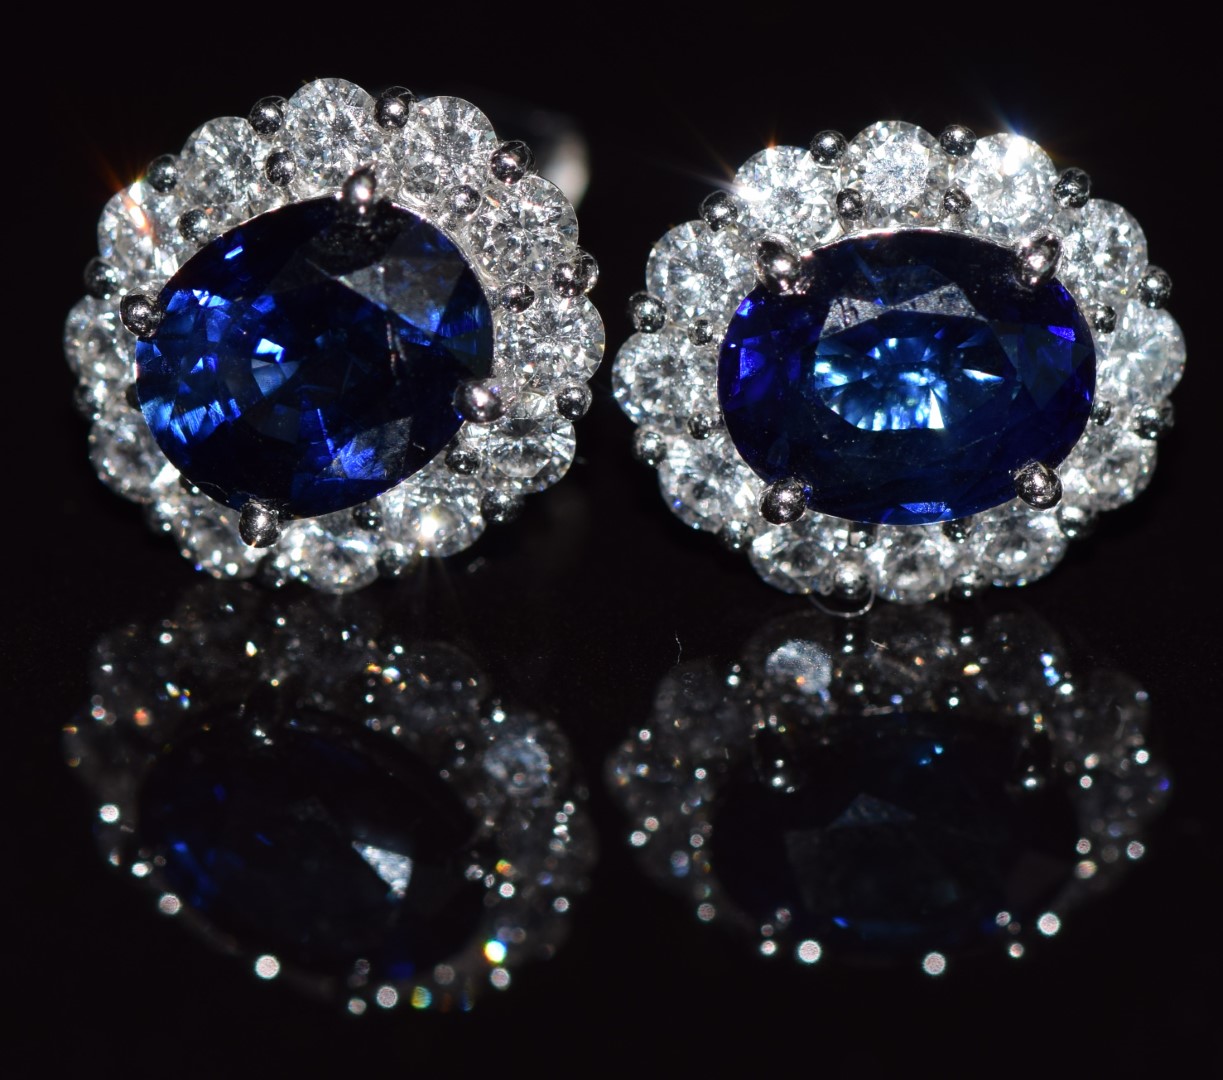 A pair of 18ct white gold earrings each set with a natural untreated 1.5ct oval cut sapphire